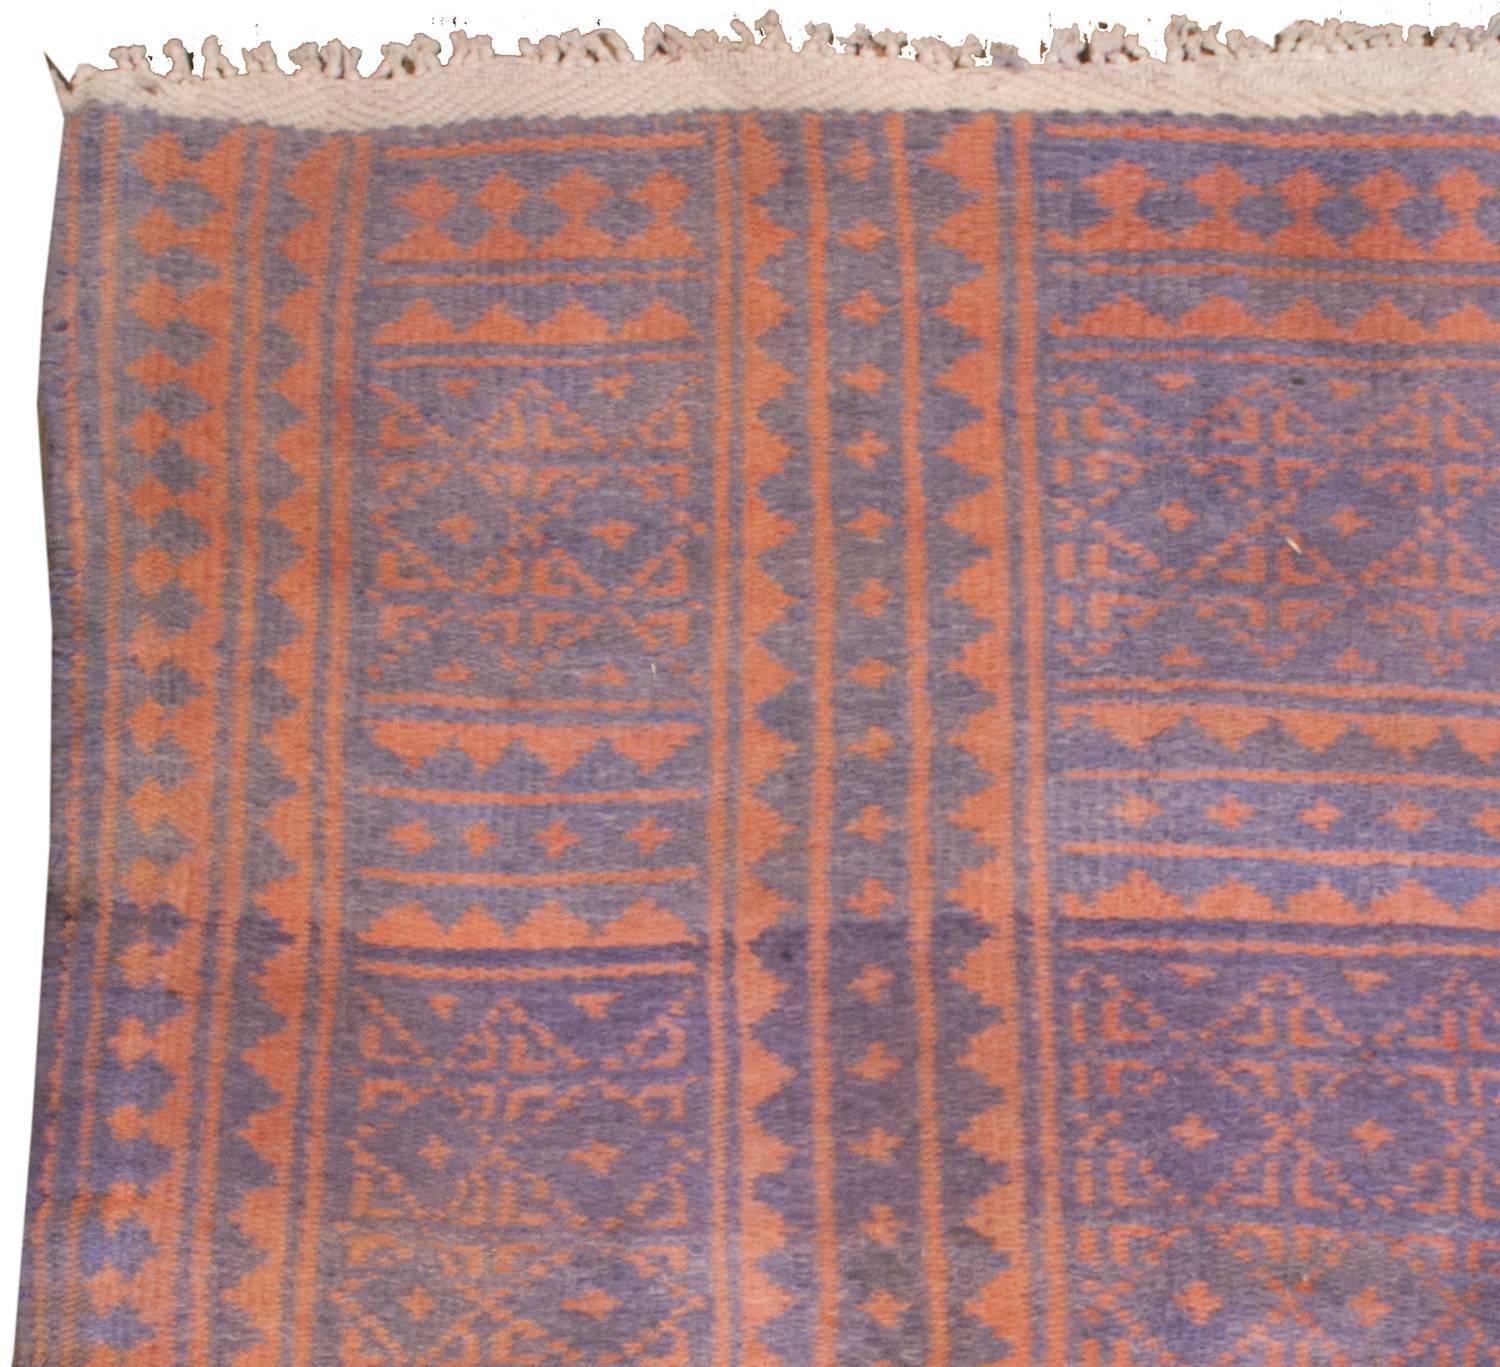 An early 20th century Persian Savek Kilim rug, woven with naturally dyed cotton, with a beautiful all-over field of small-scale geometric pattern of diamonds, crosses, and square dots on an indigo background flanked by a border of geometric zigzag